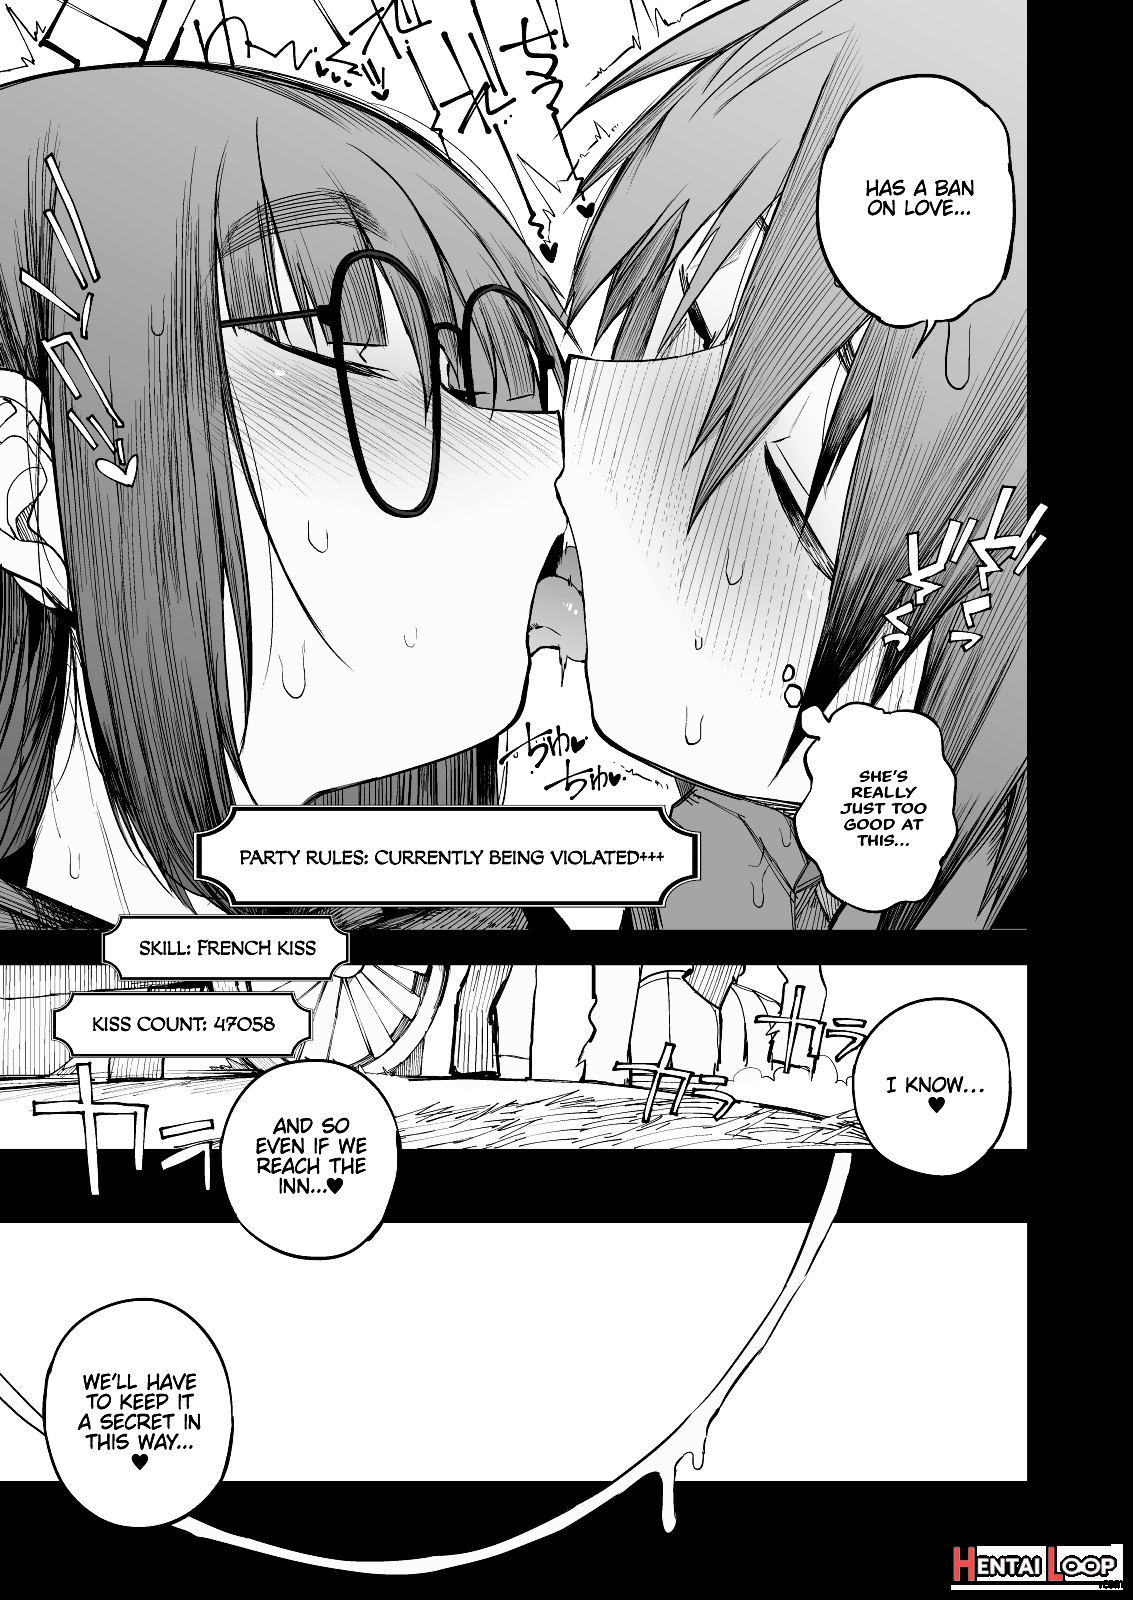 The S-rank Pervert Status Of The Unfit Homely Girl In The Hero Party With A Ban On Love page 9